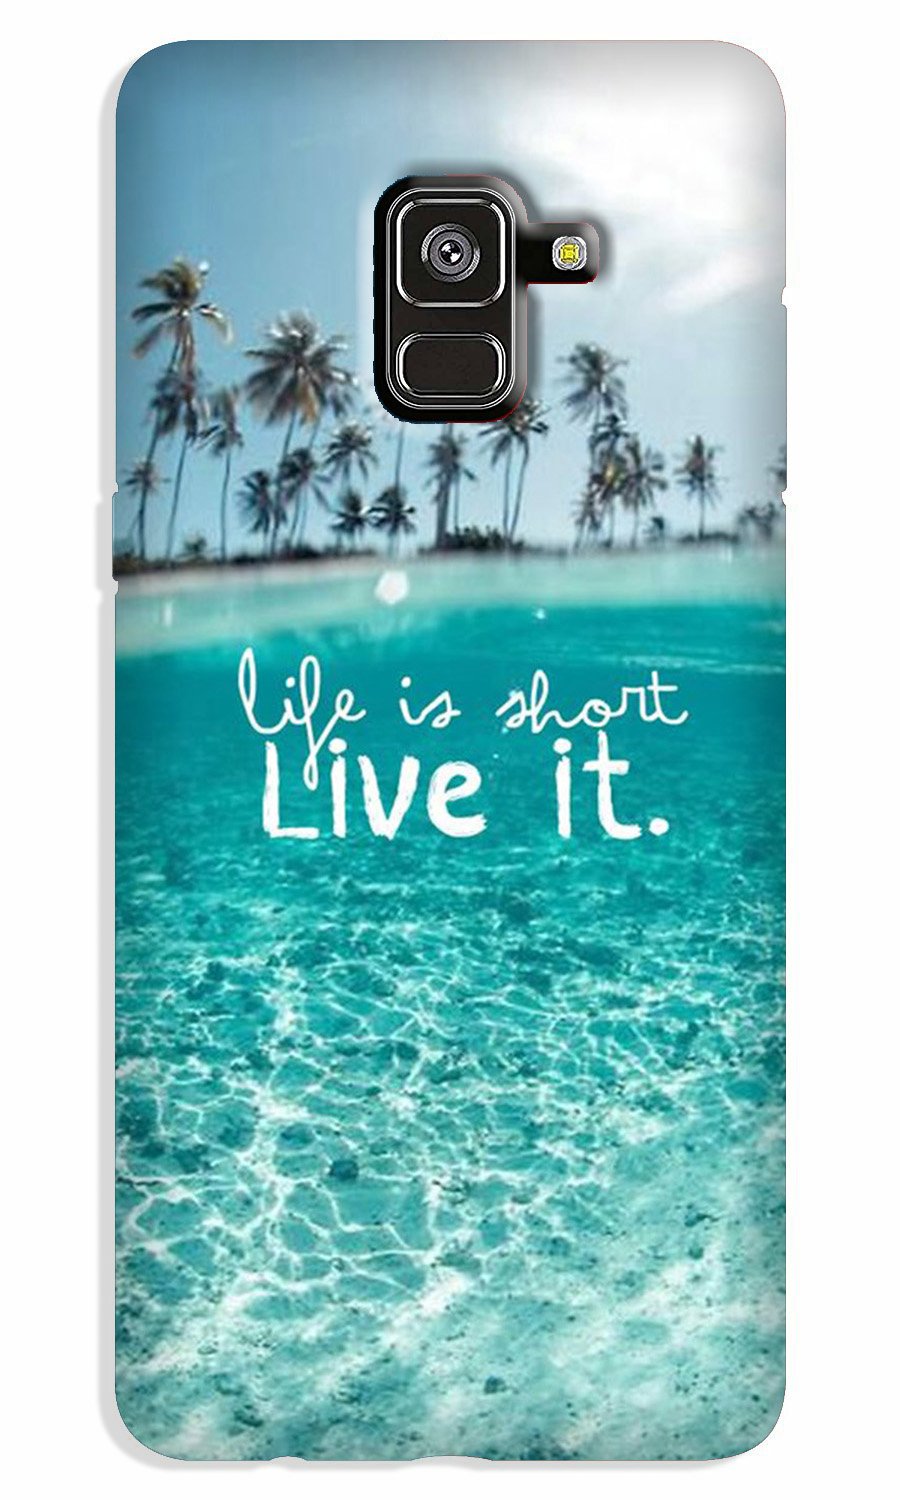 Life is short live it Case for Galaxy A8 Plus